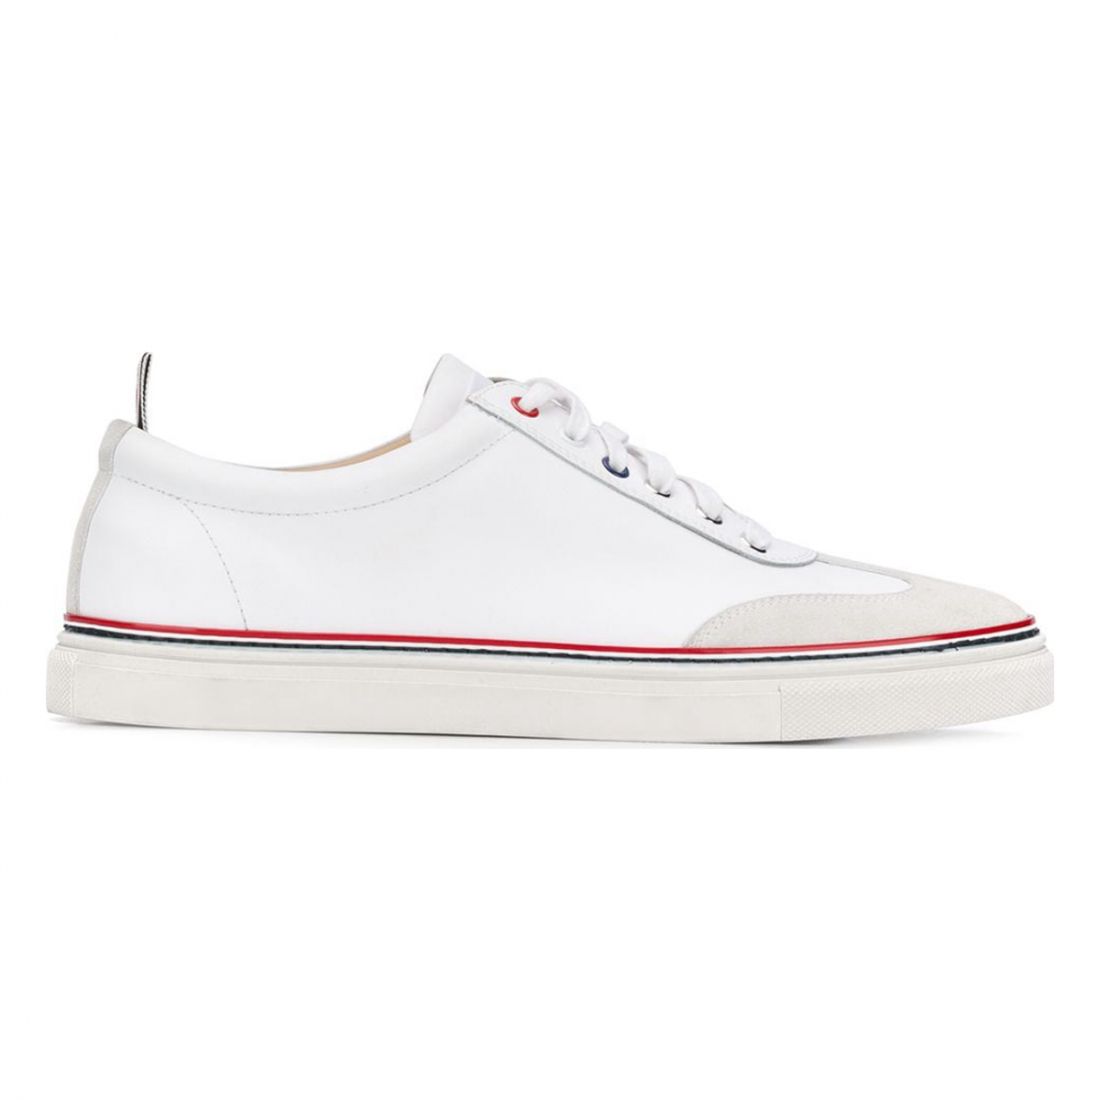 Thom Browne - Sneakers pour Hommes